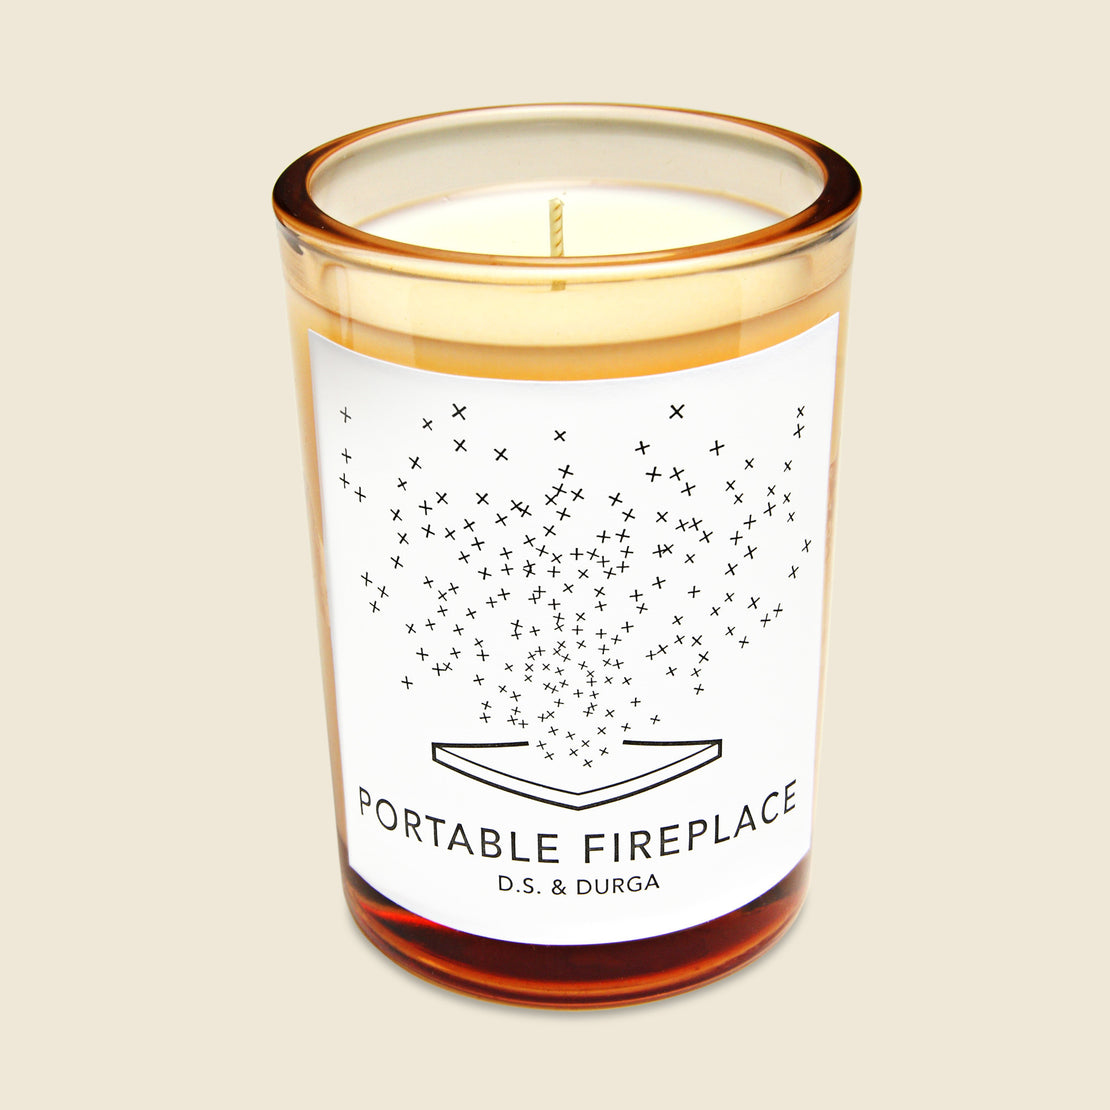 Portable Fireplace Candle - D.S. & Durga - STAG Provisions - Home - Fragrance - Candle